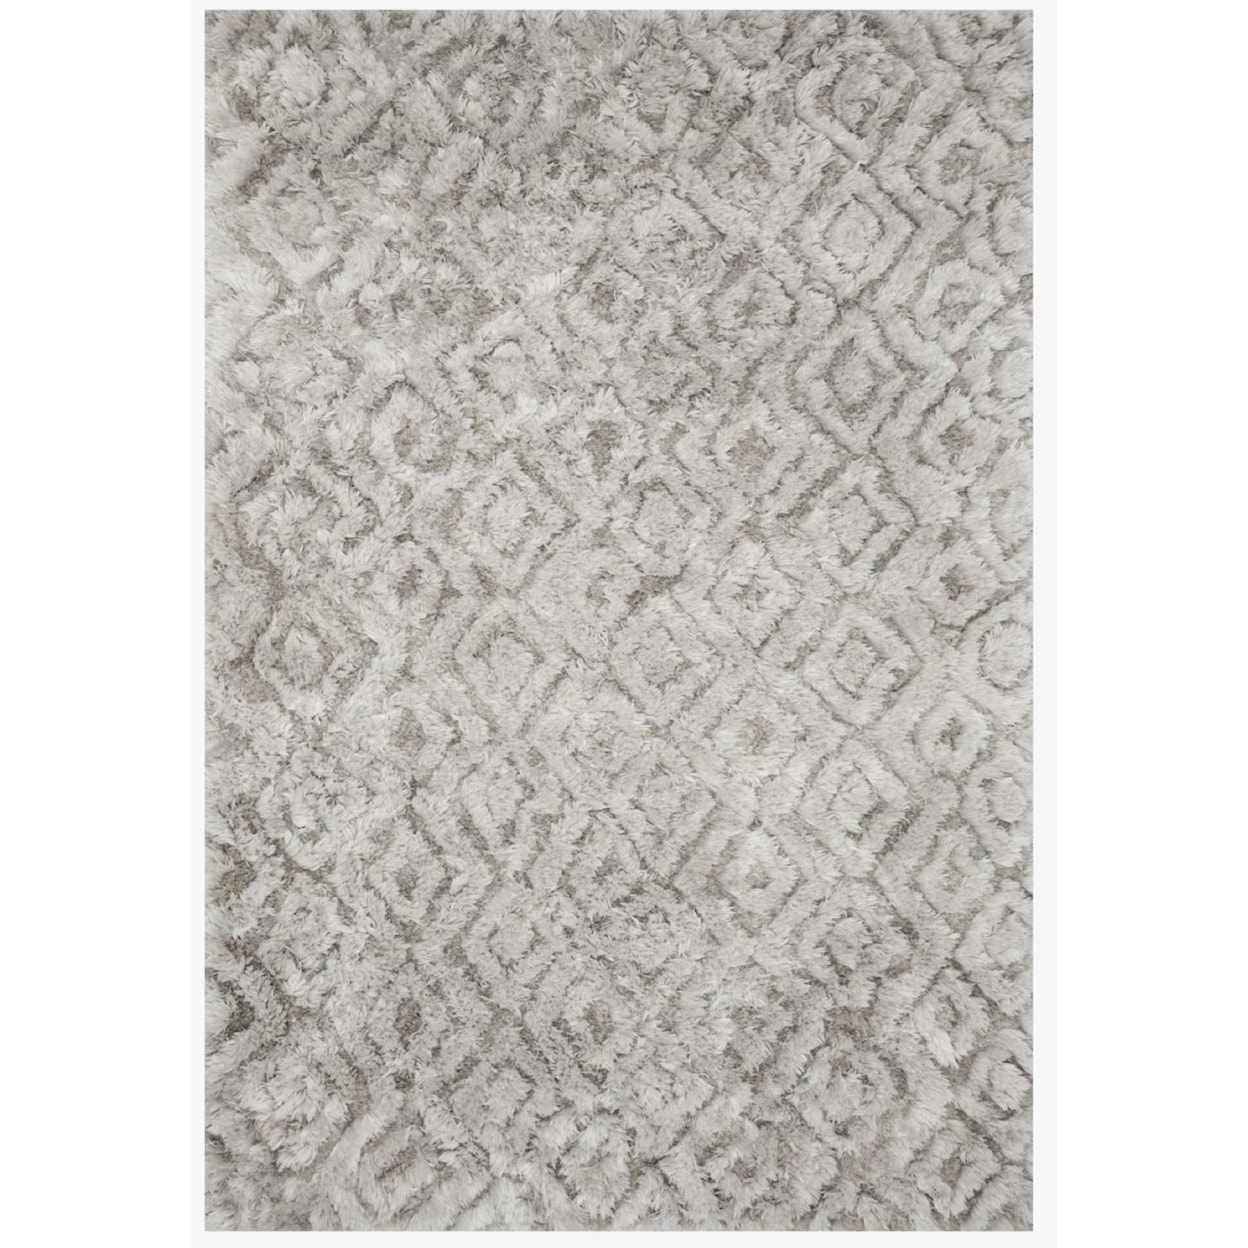 Reeds Rugs CASPIA 5 X 7-6 Silver Area Rug